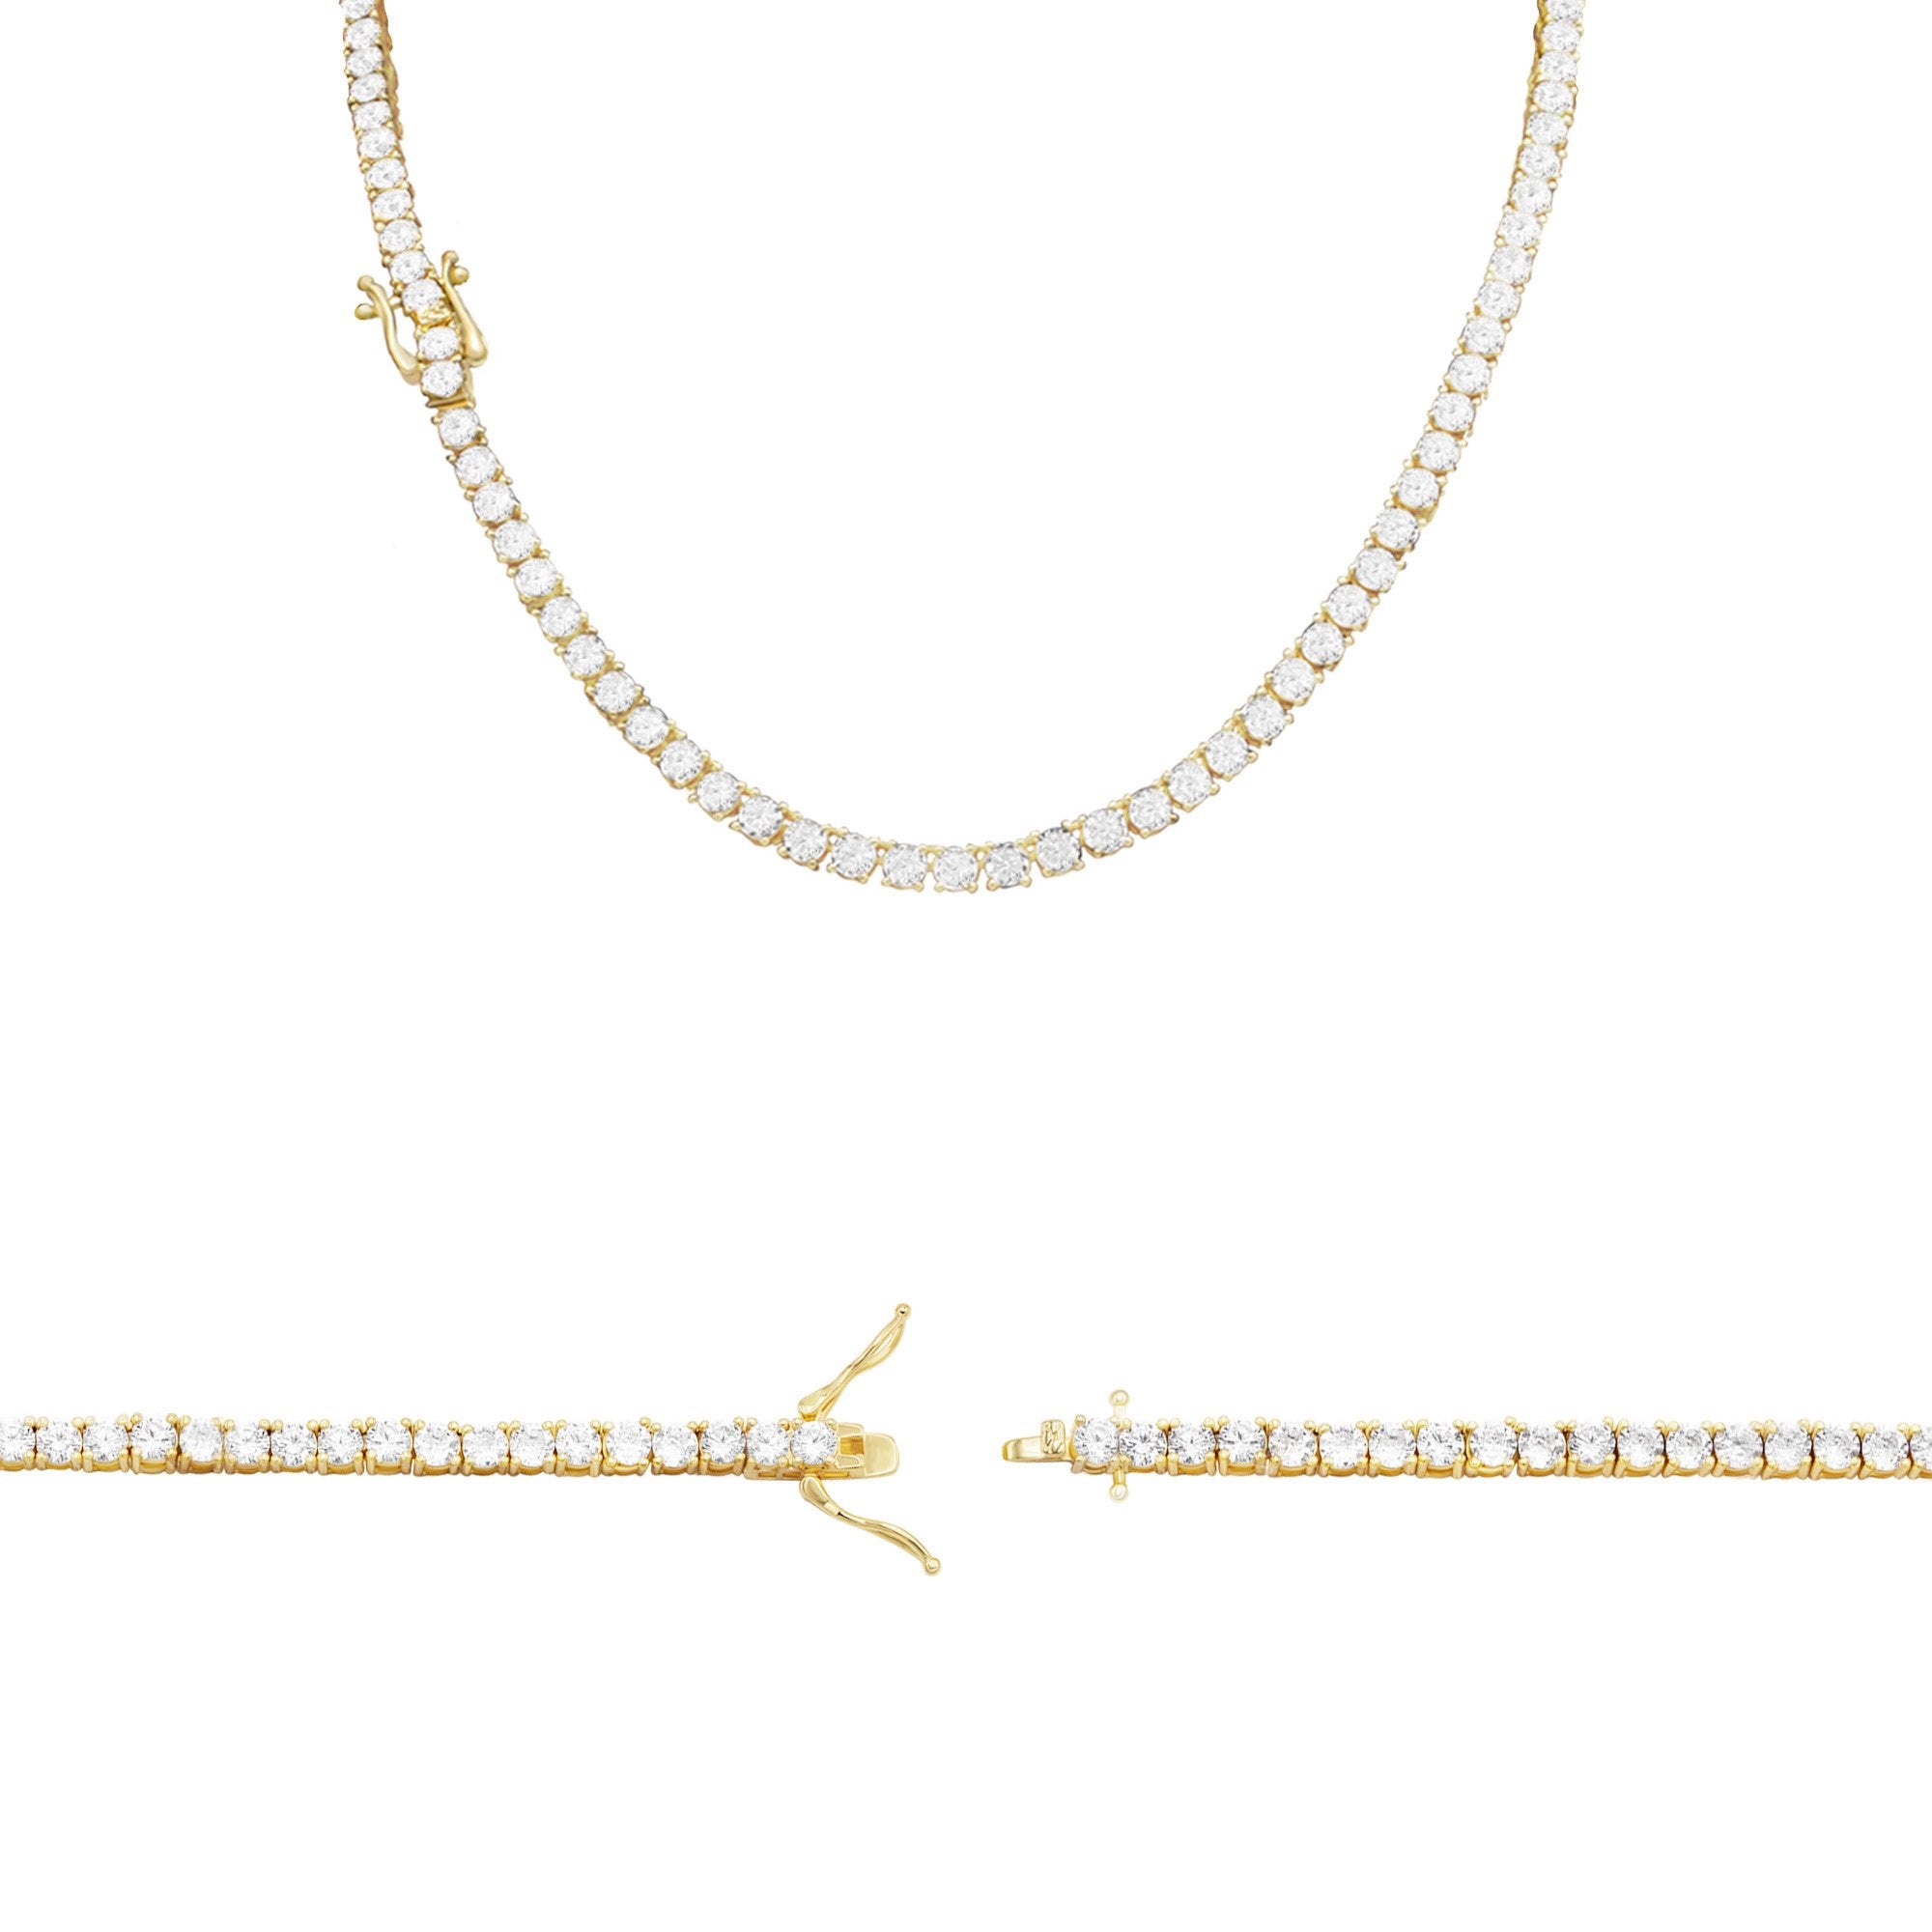 Chelsea Chain Tennis Necklace - The Clear Cut Collection